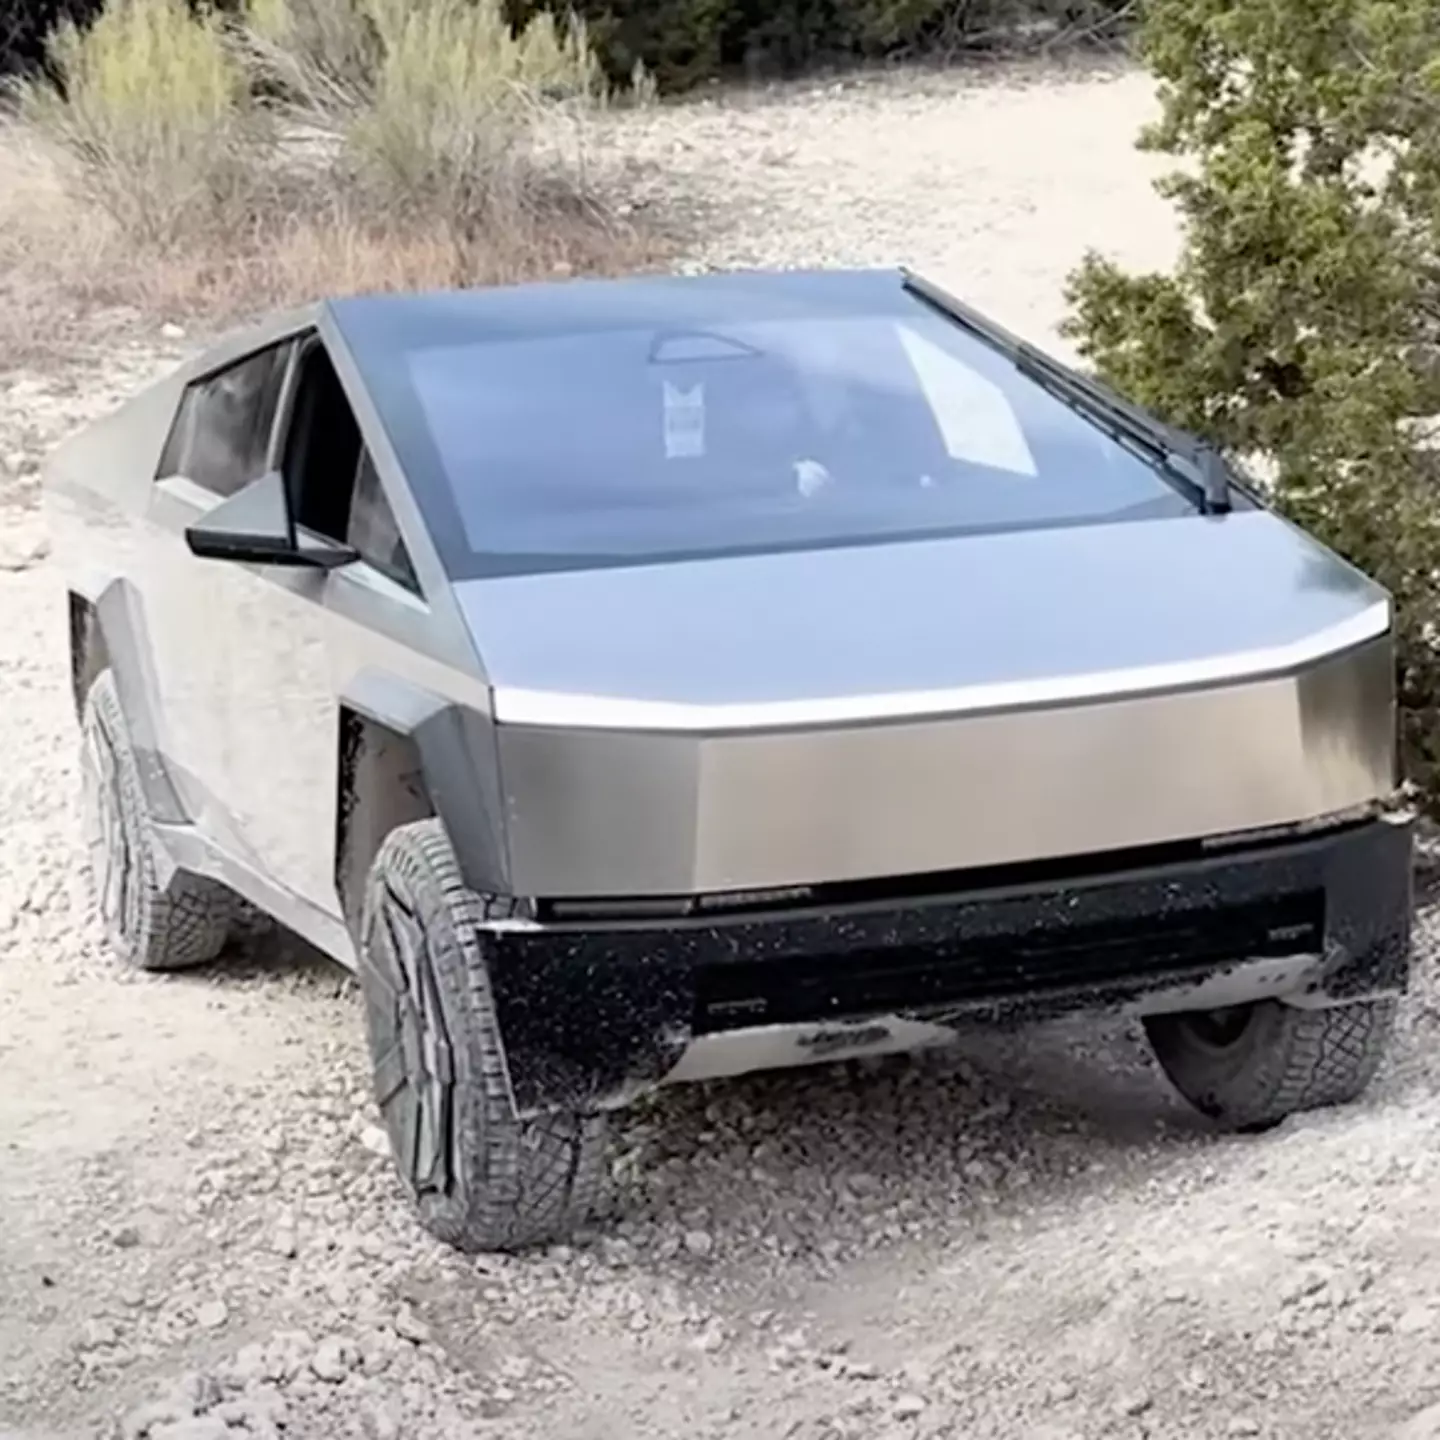 Tesla Cybertruck gets stuck off-roading on hill whilst Subaru and Toyota vehicles face no problems